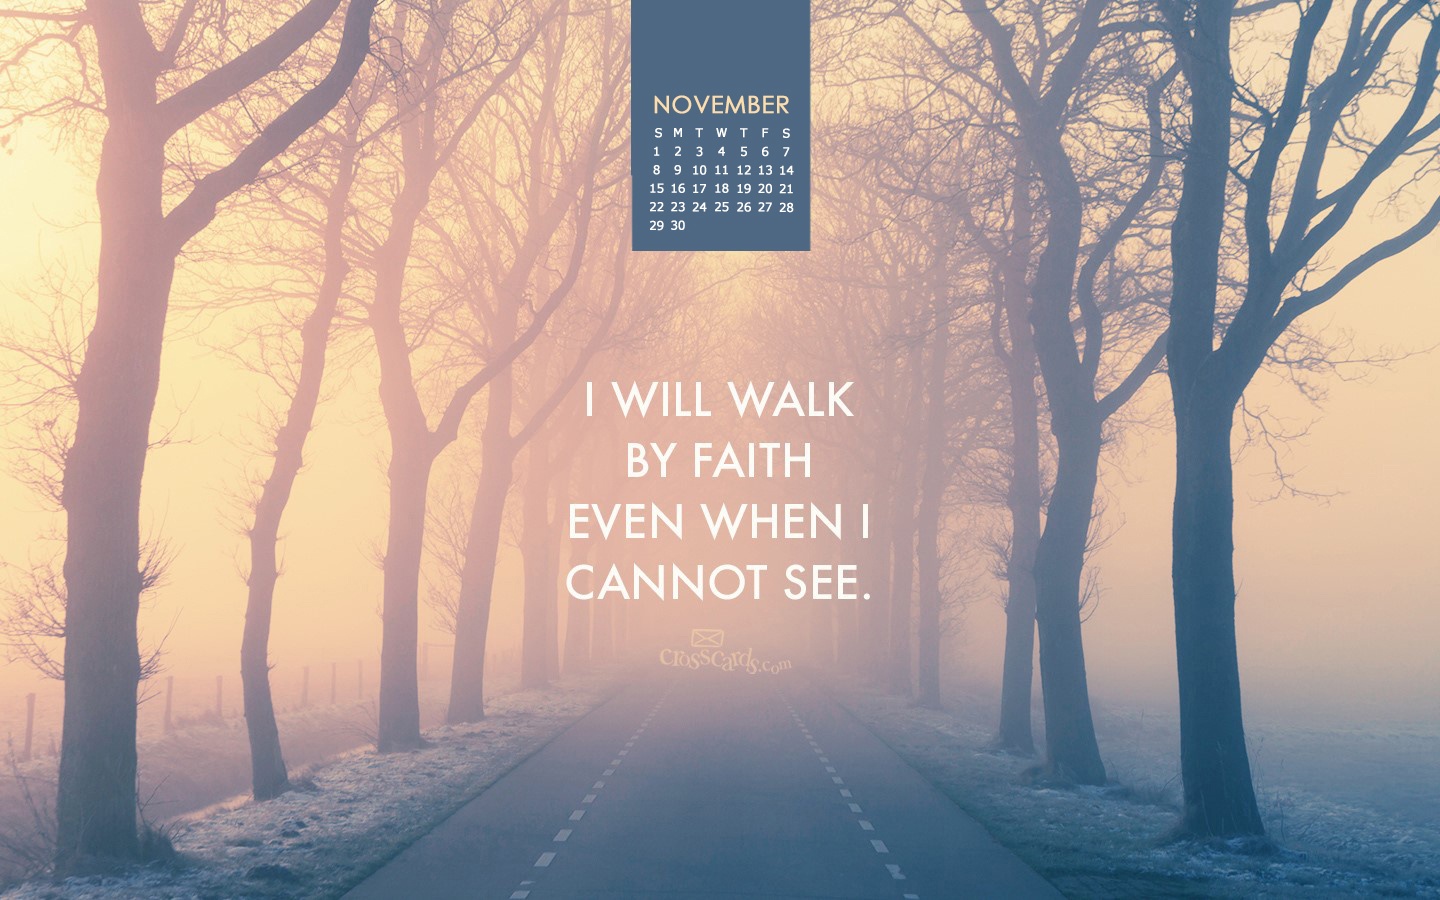 Faith Wallpaper For Android On Hd Wallpaper - Walk By Faith Even When I Cannot See - HD Wallpaper 